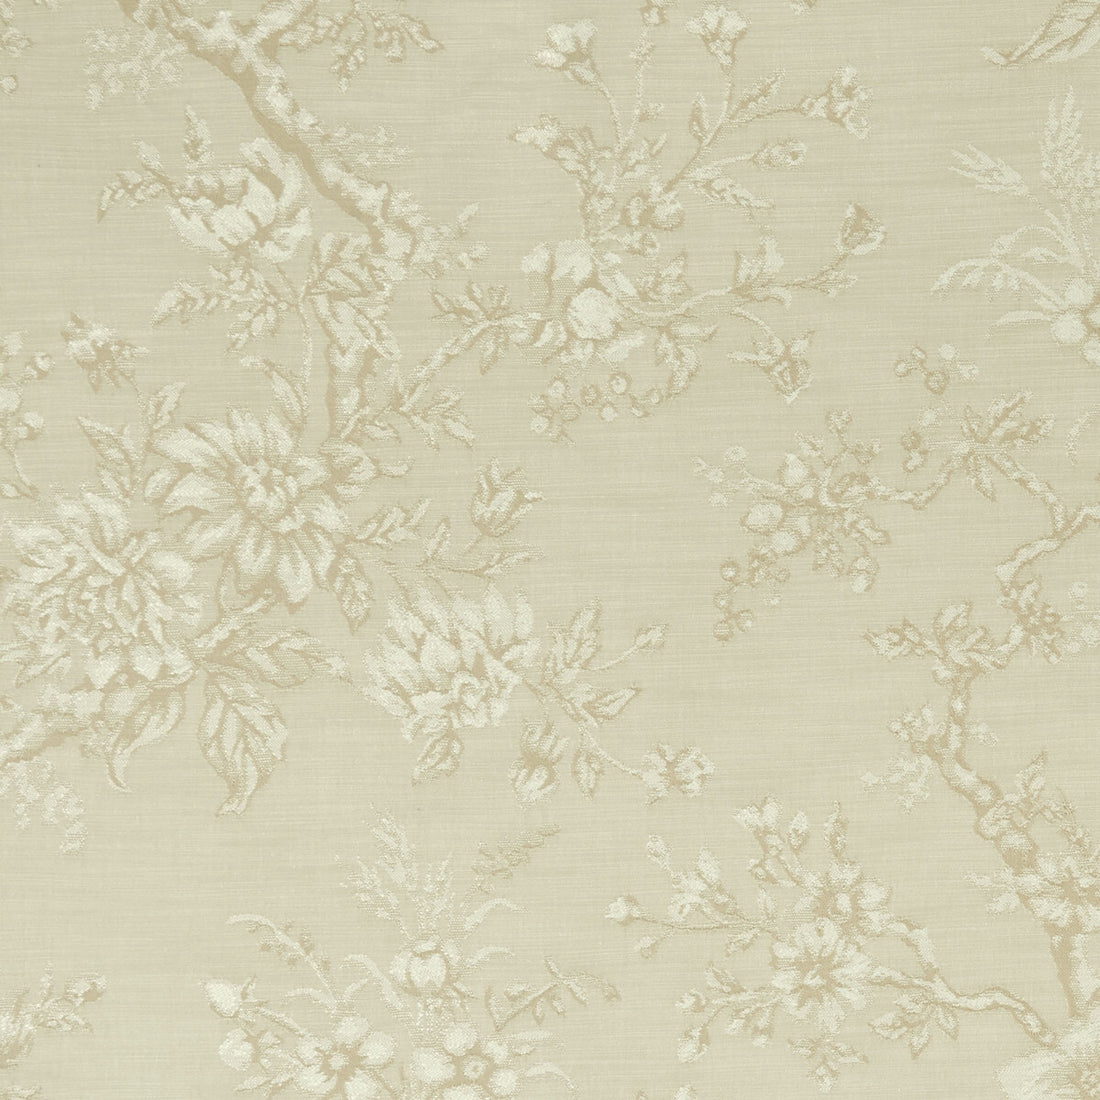 Simone fabric in natural color - pattern F1047/06.CAC.0 - by Clarke And Clarke in the Clarke &amp; Clarke Castle Garden collection